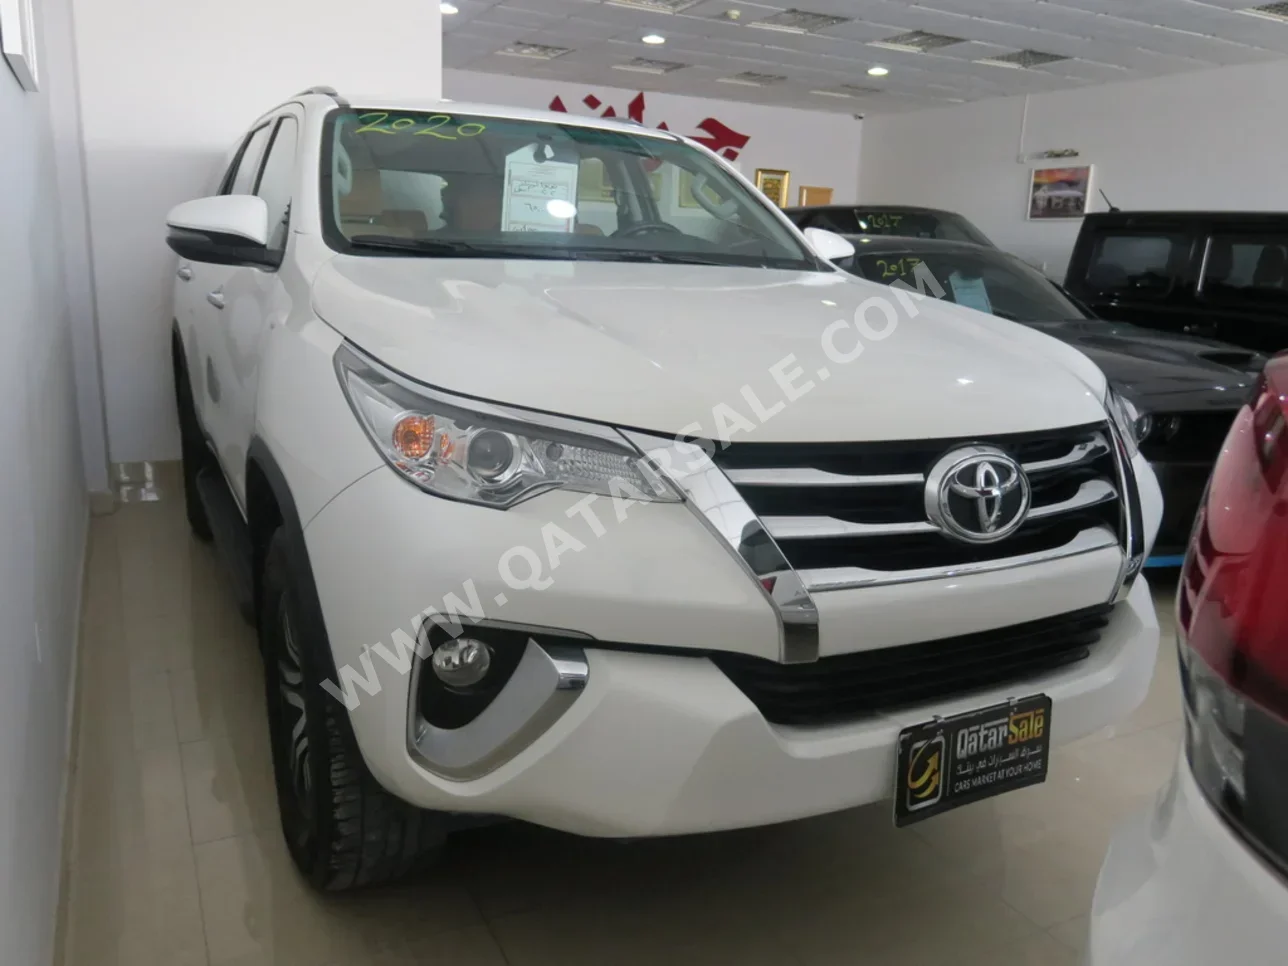 Toyota  Fortuner  2020  Automatic  65,000 Km  4 Cylinder  Four Wheel Drive (4WD)  SUV  White